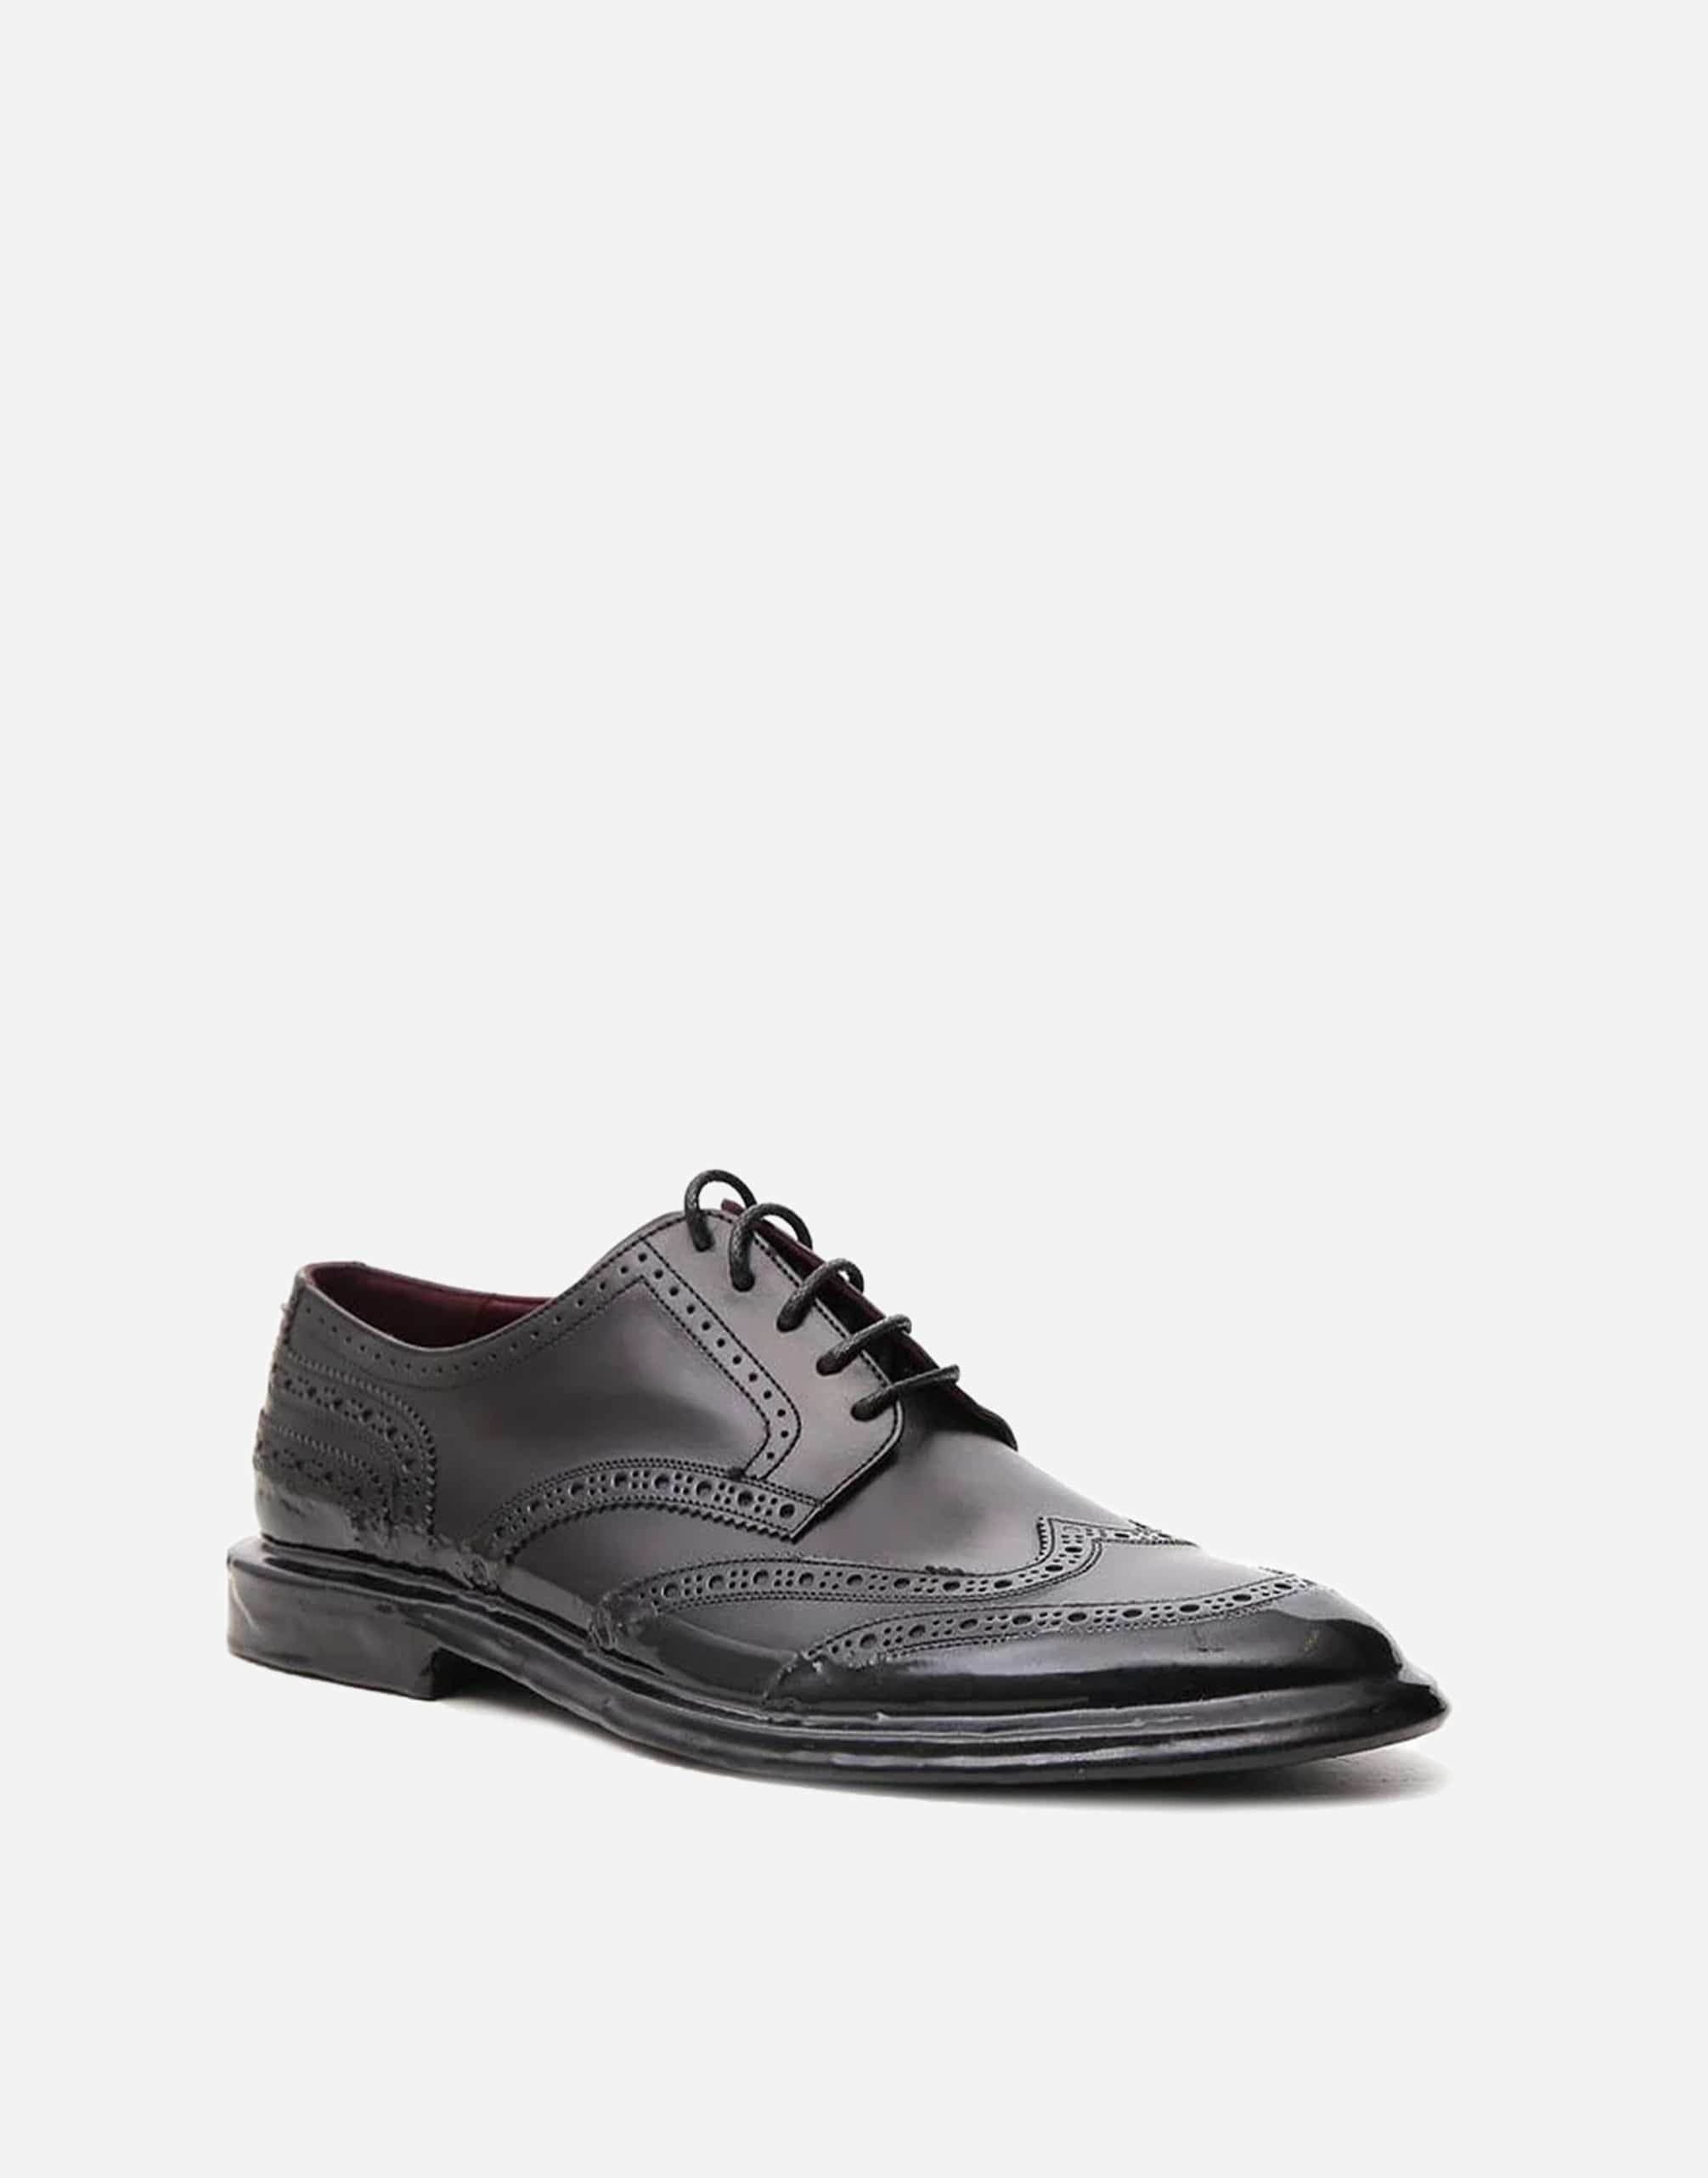 Dolce & Gabbana Lace-Up Oxford Derby Shoes